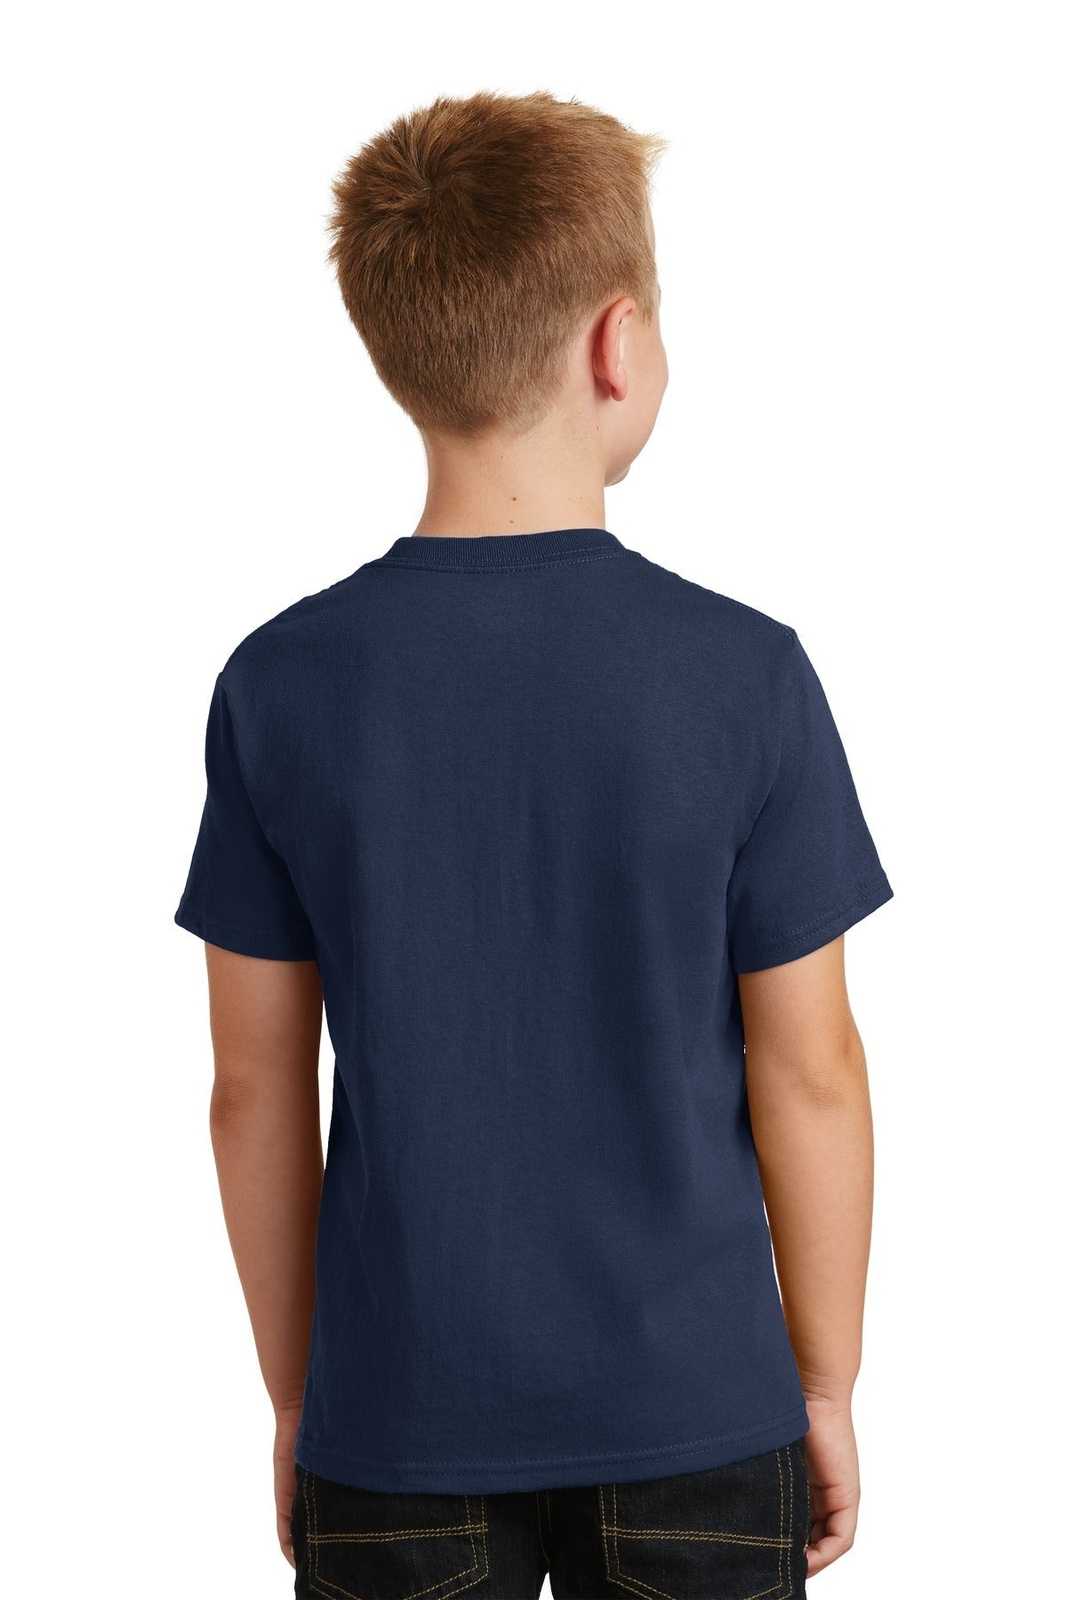 Port & Company PC54Y Youth Core Cotton Tee - Navy - HIT a Double - 1